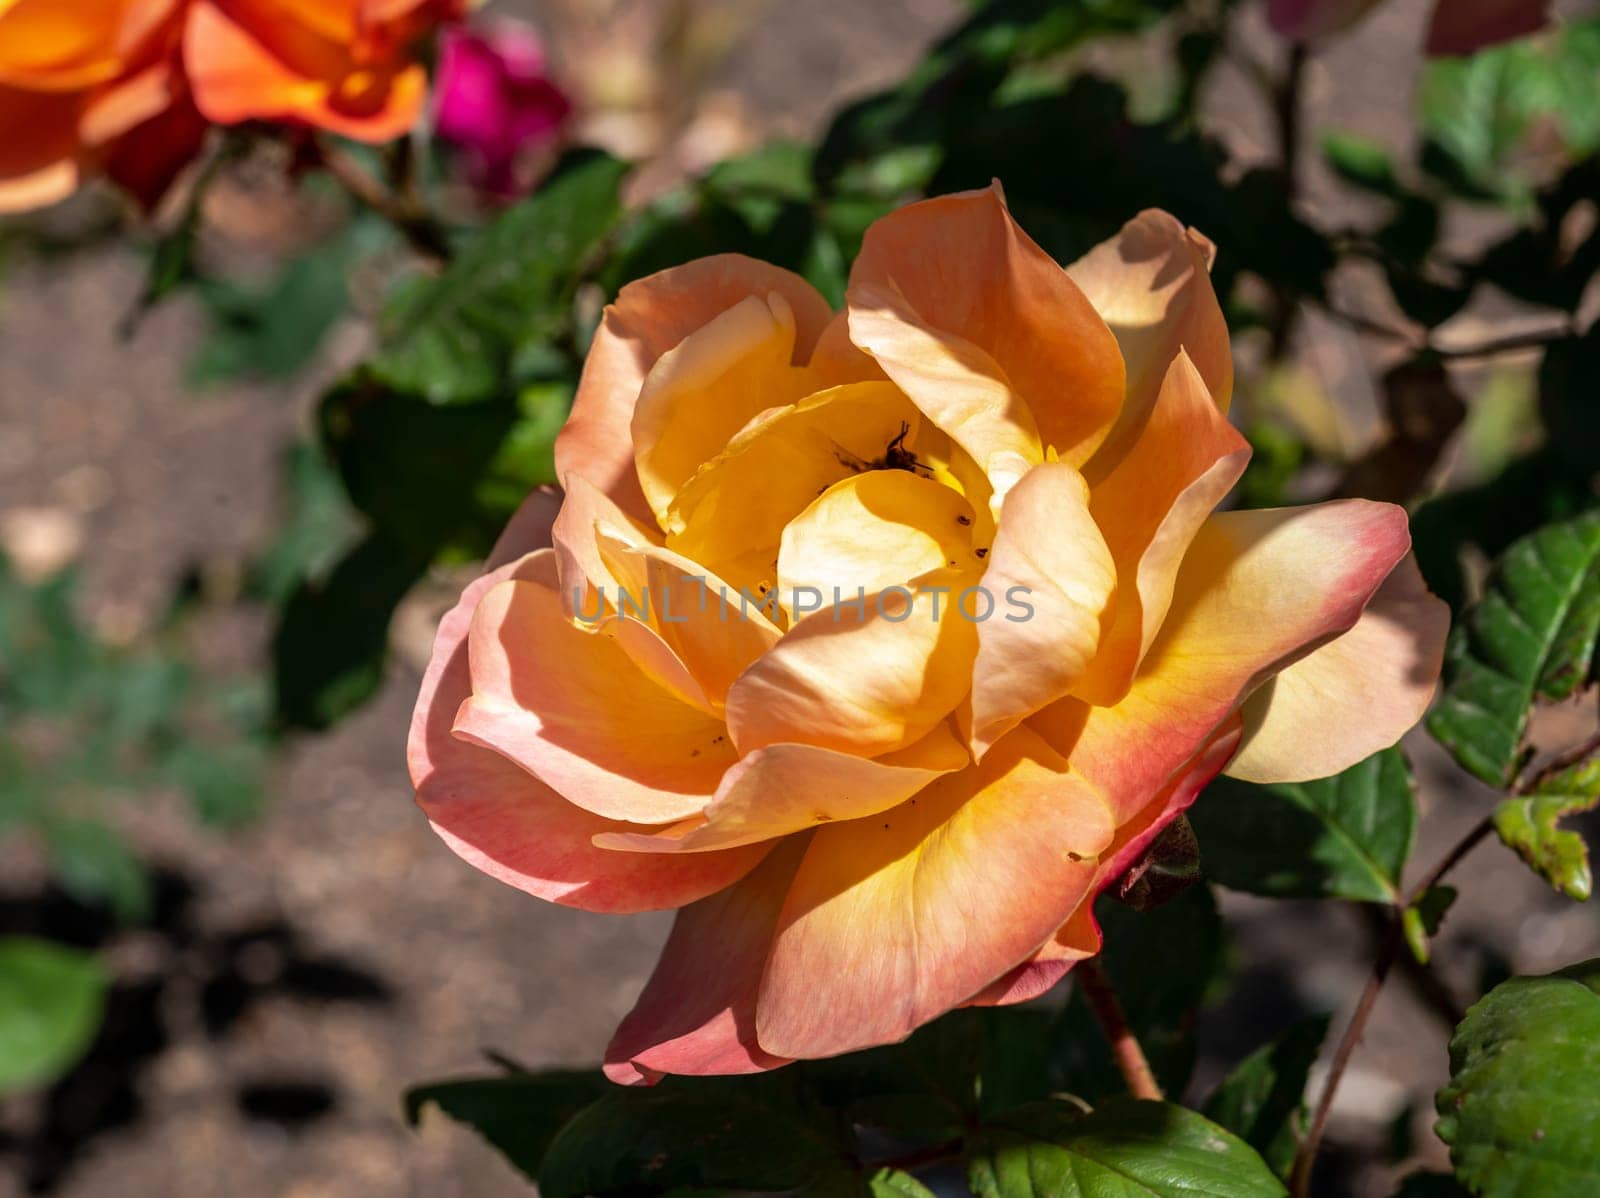 Blooming orange rose on a green leaves background by Multipedia